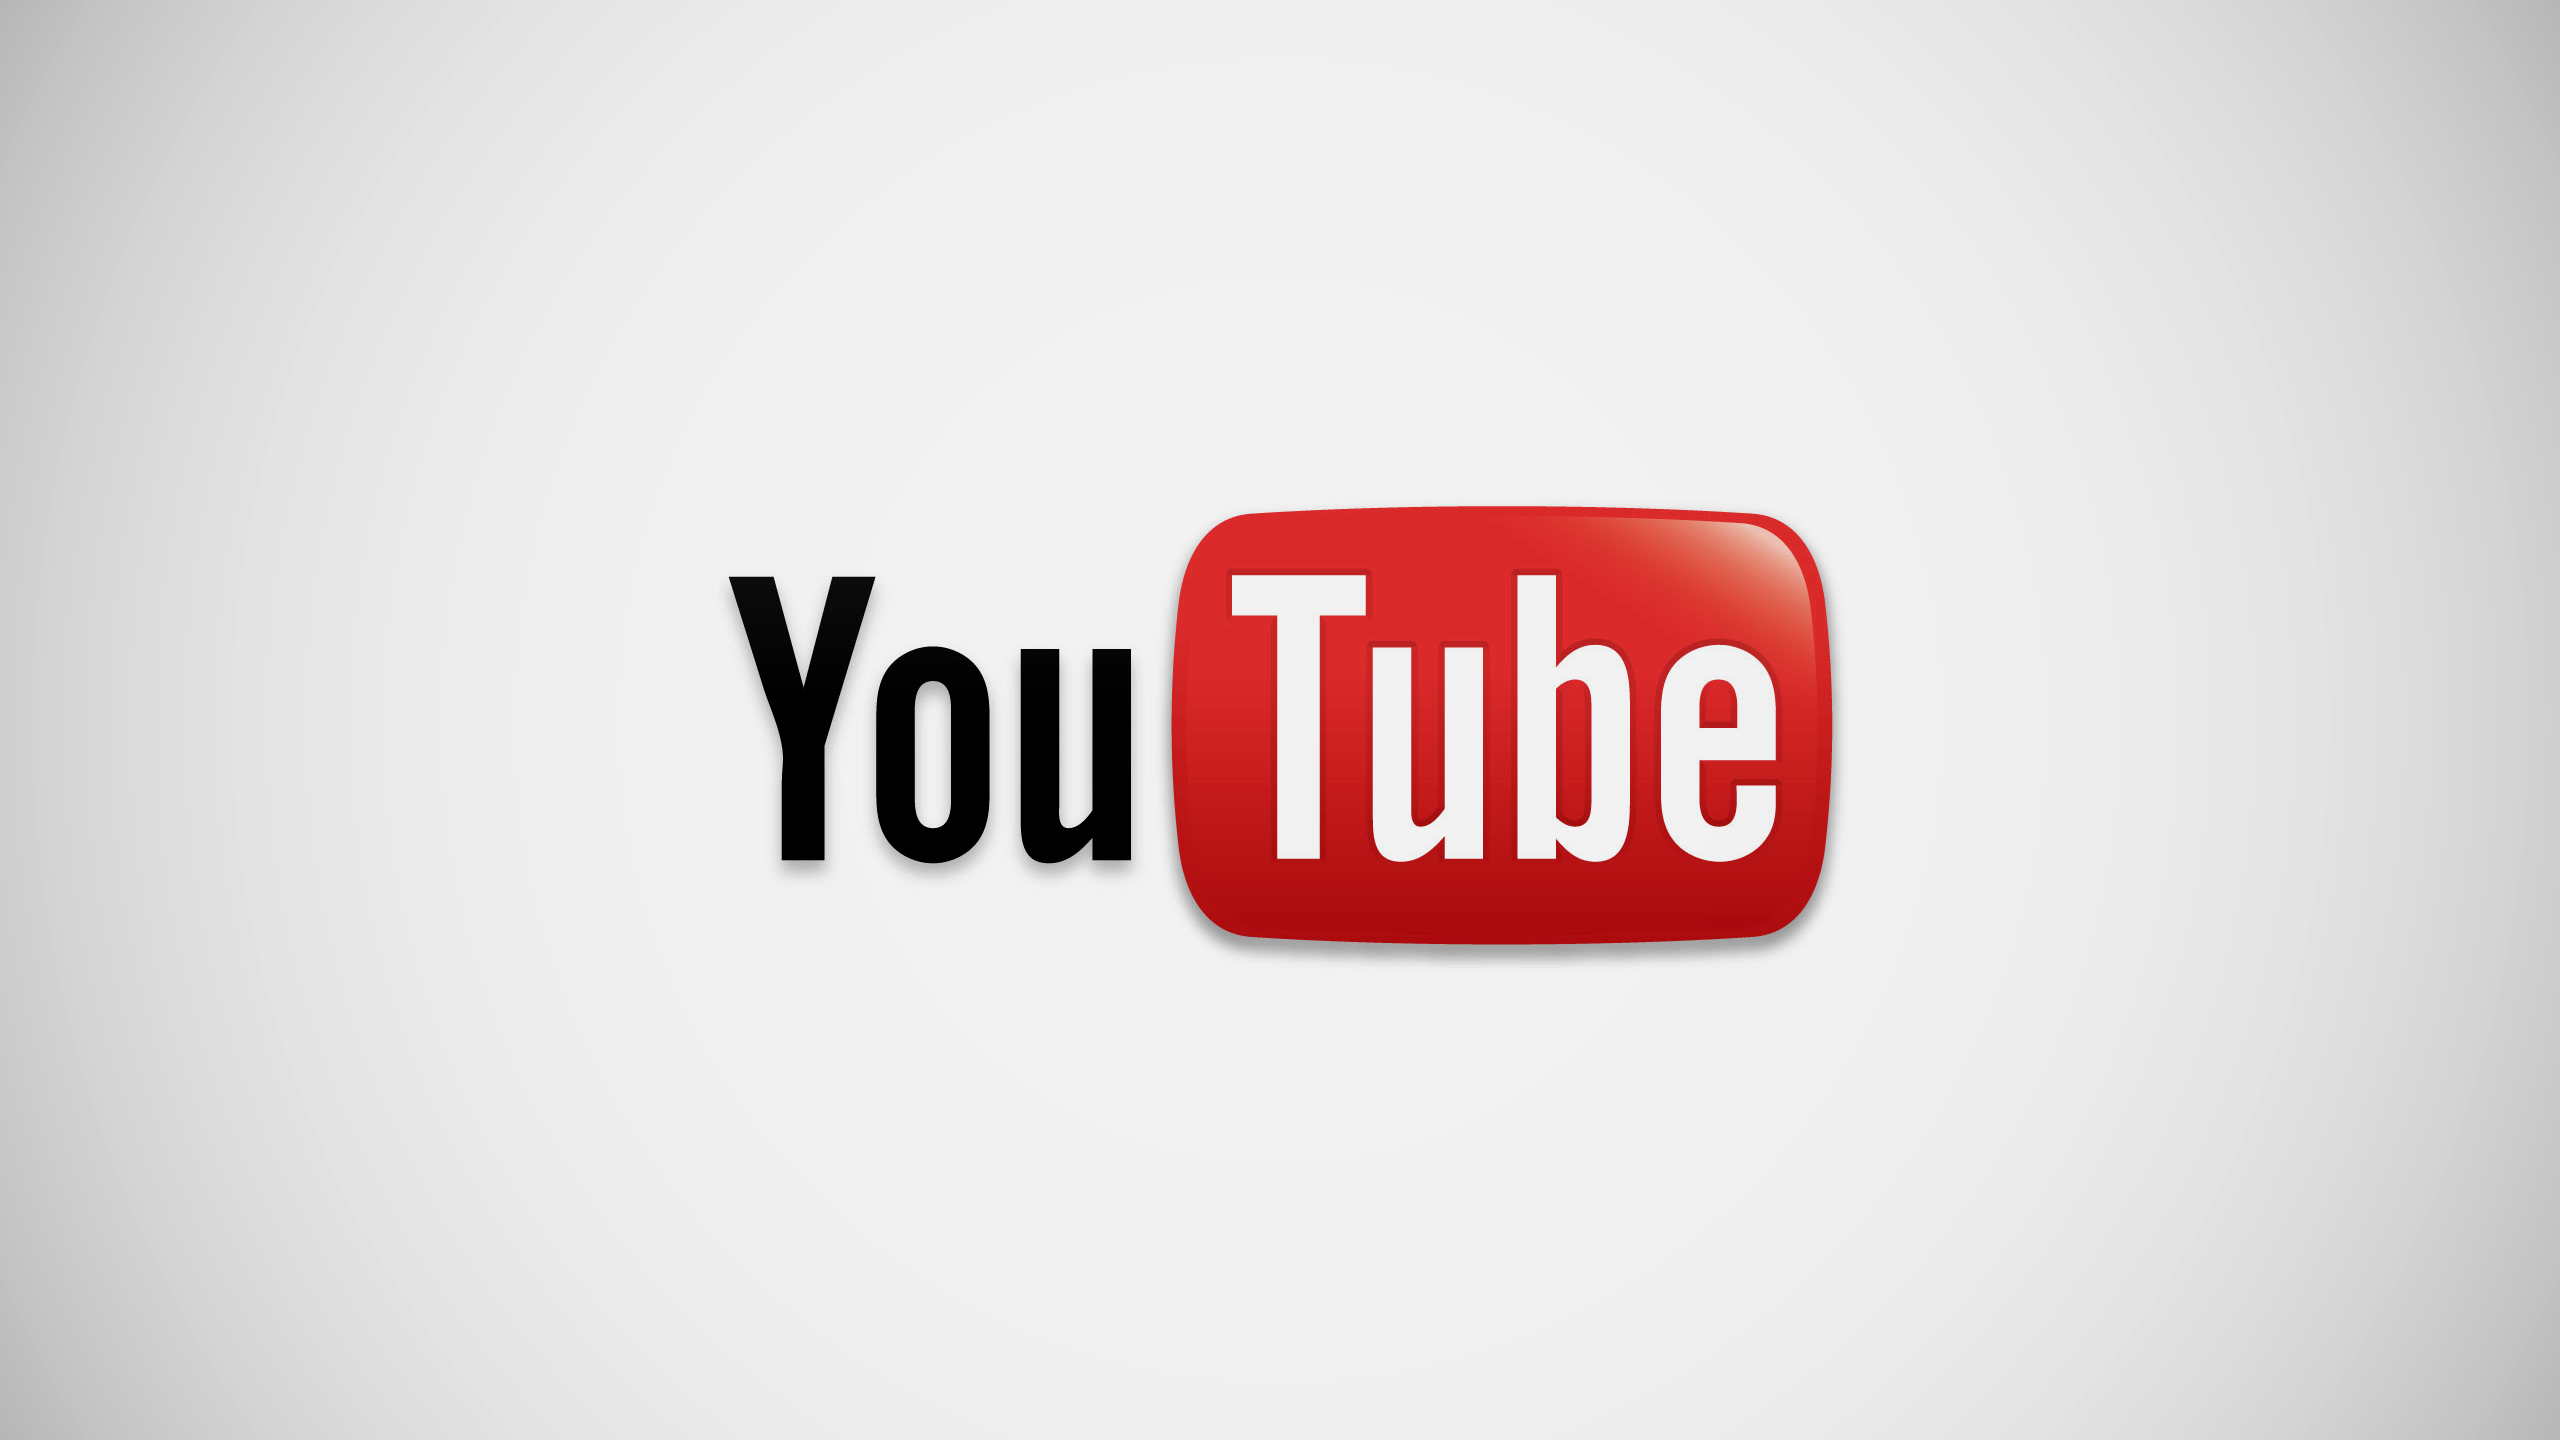 Devising A Content Strategy For Your YouTube Account – PART 2 | grassrootsy